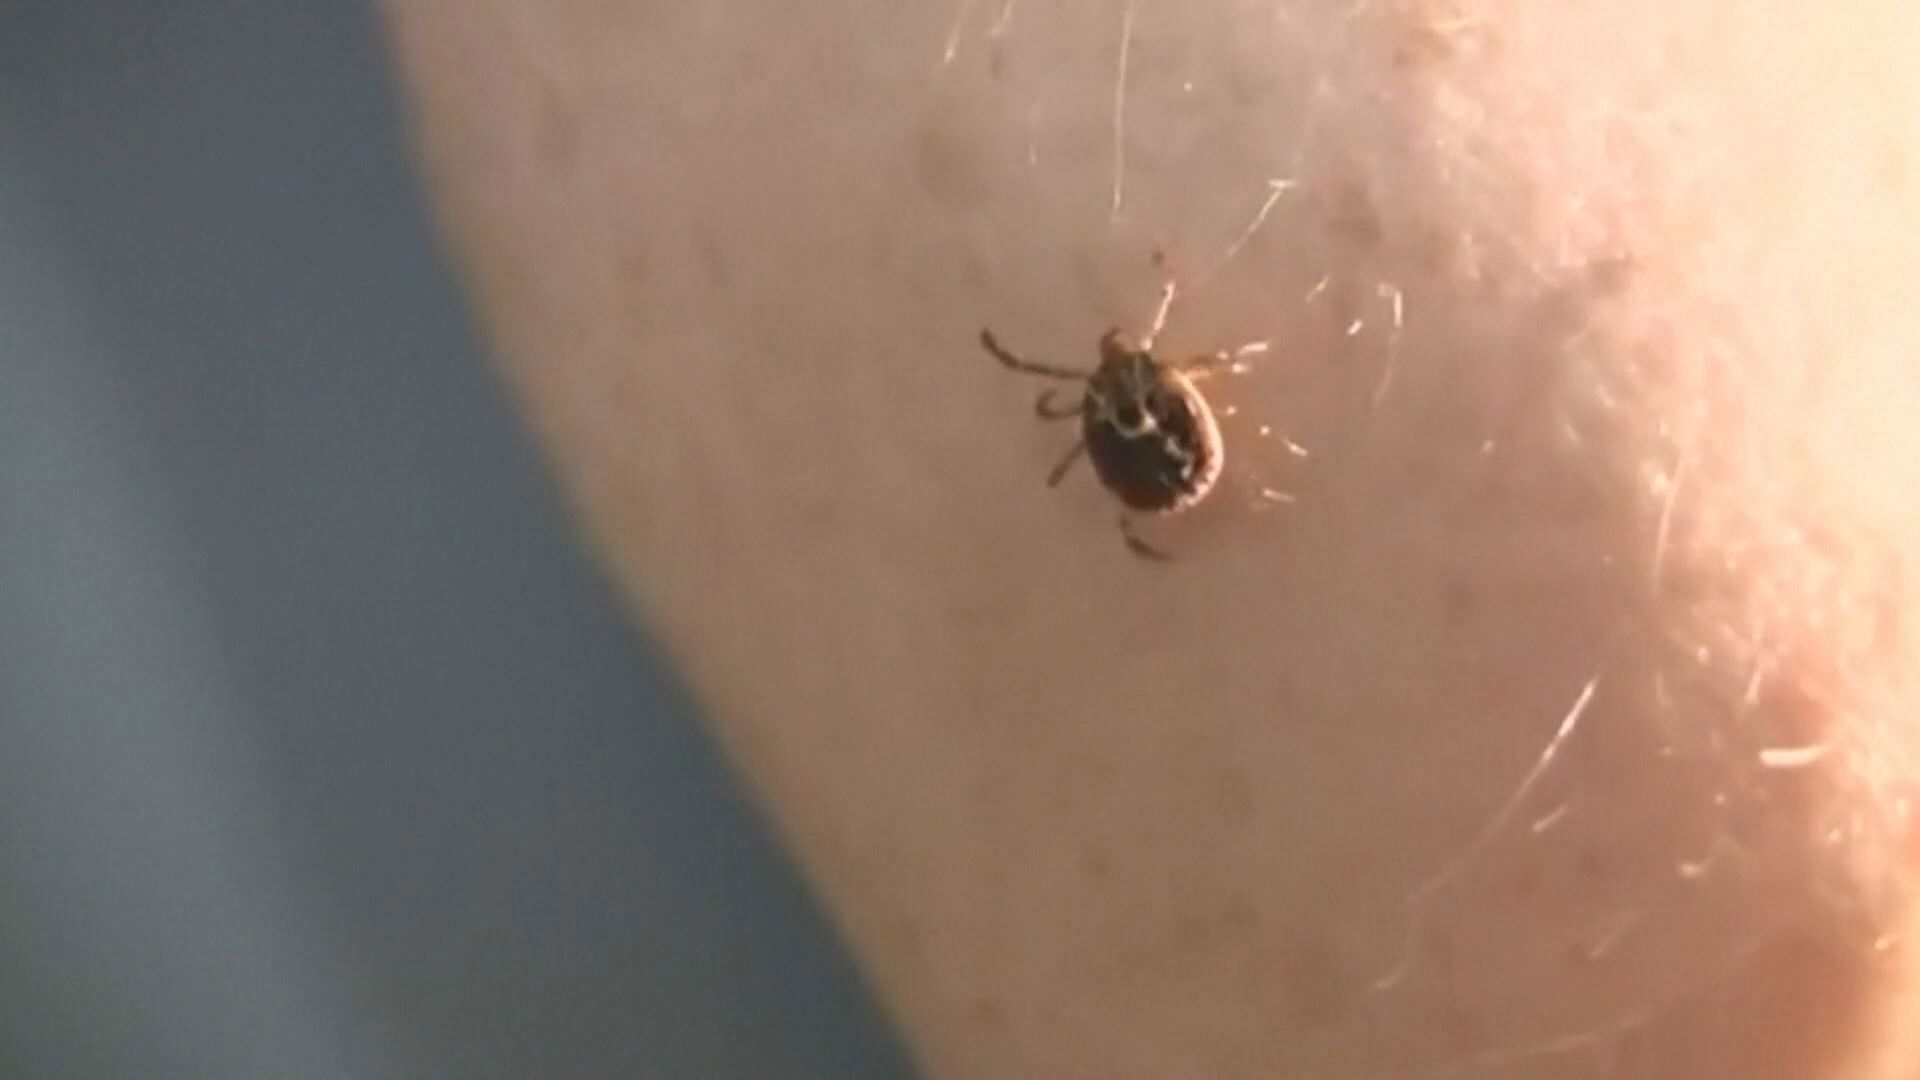 If you have plans to spend the evening outside you may want to check yourself for ticks.